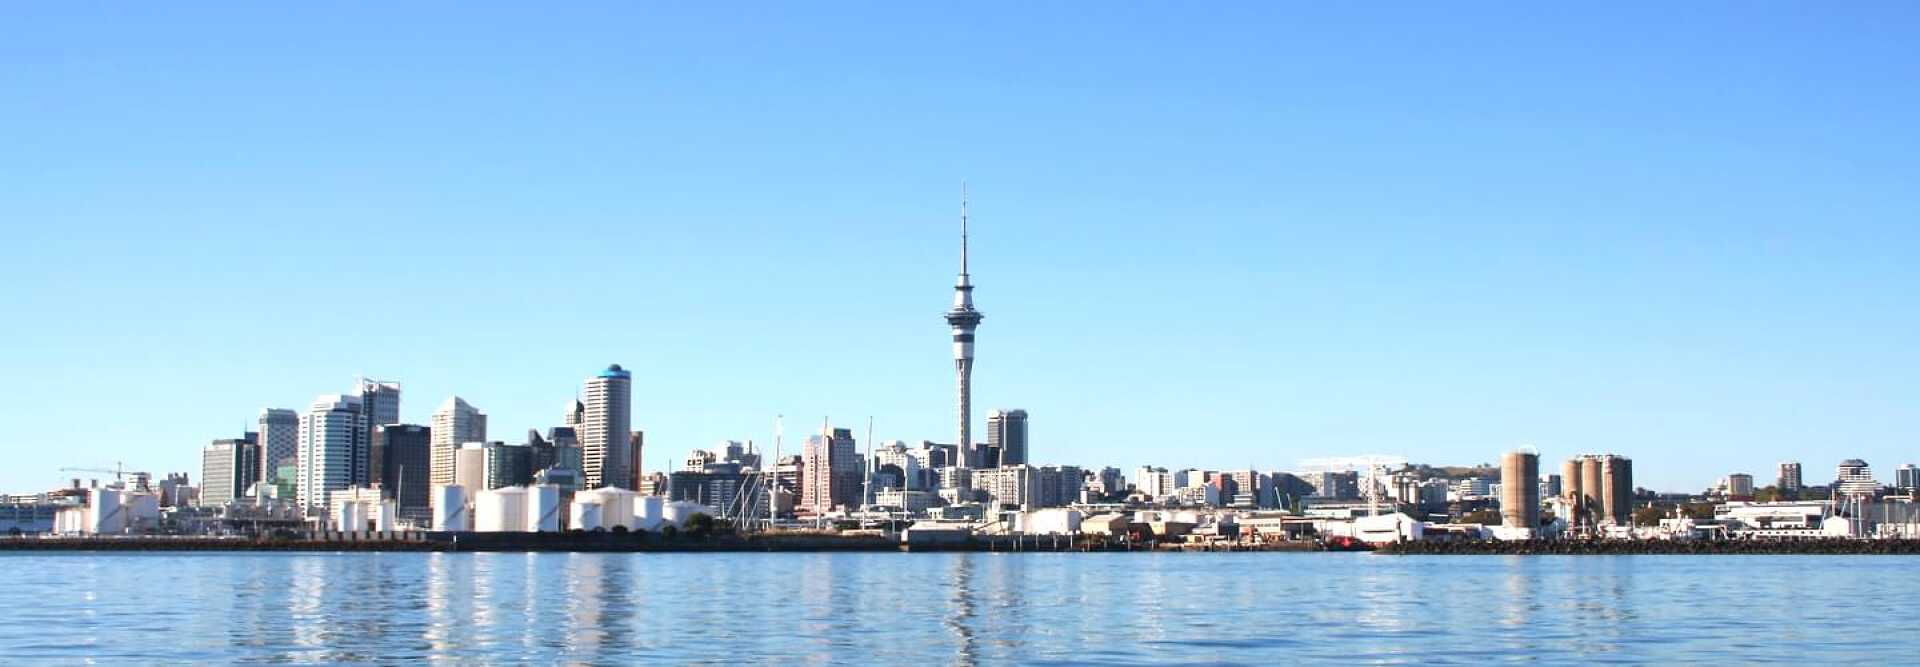 Photography of Auckland in New Zeland. The river in the foreground and the skyscrapers of the city center with the Sky Tower in the background.